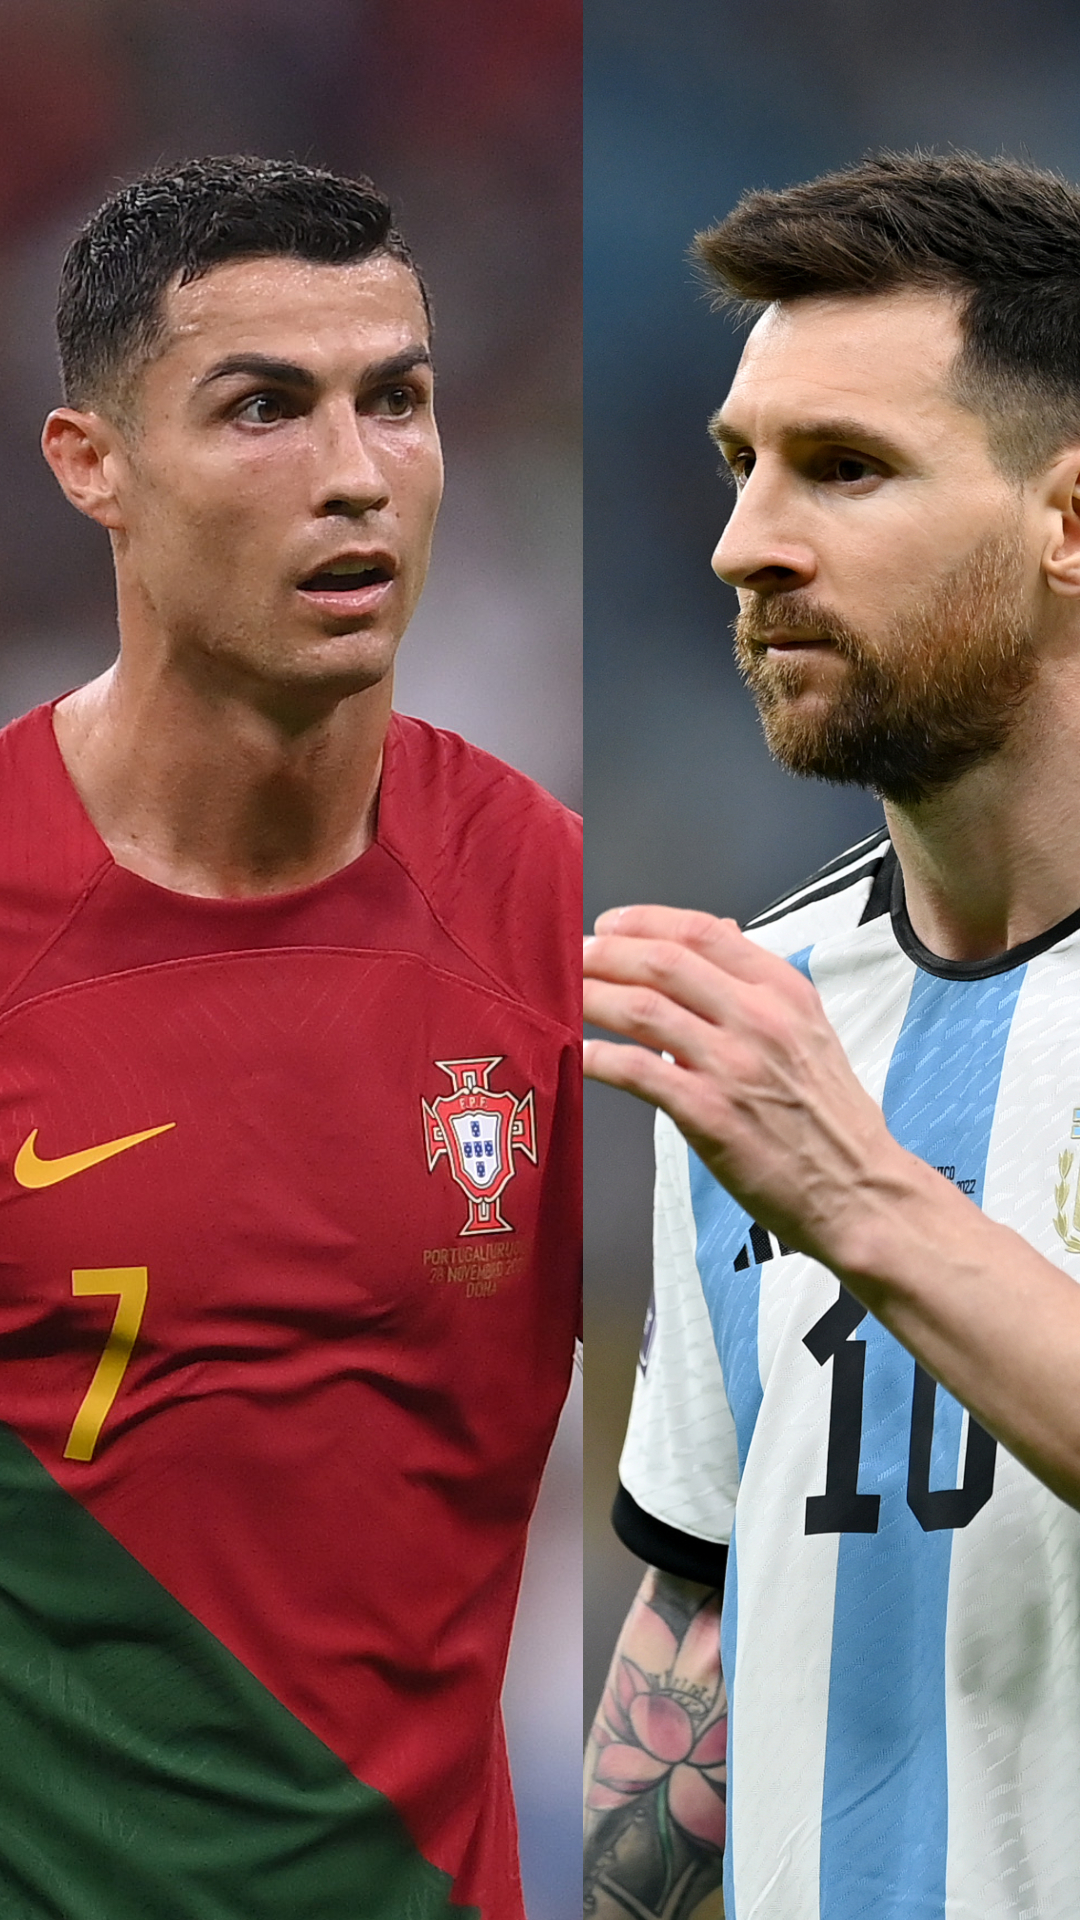 Cristiano Ronaldo and Lionel Messi come together for first-ever joint  promotion ahead of FIFA World Cup 2022 - India Today